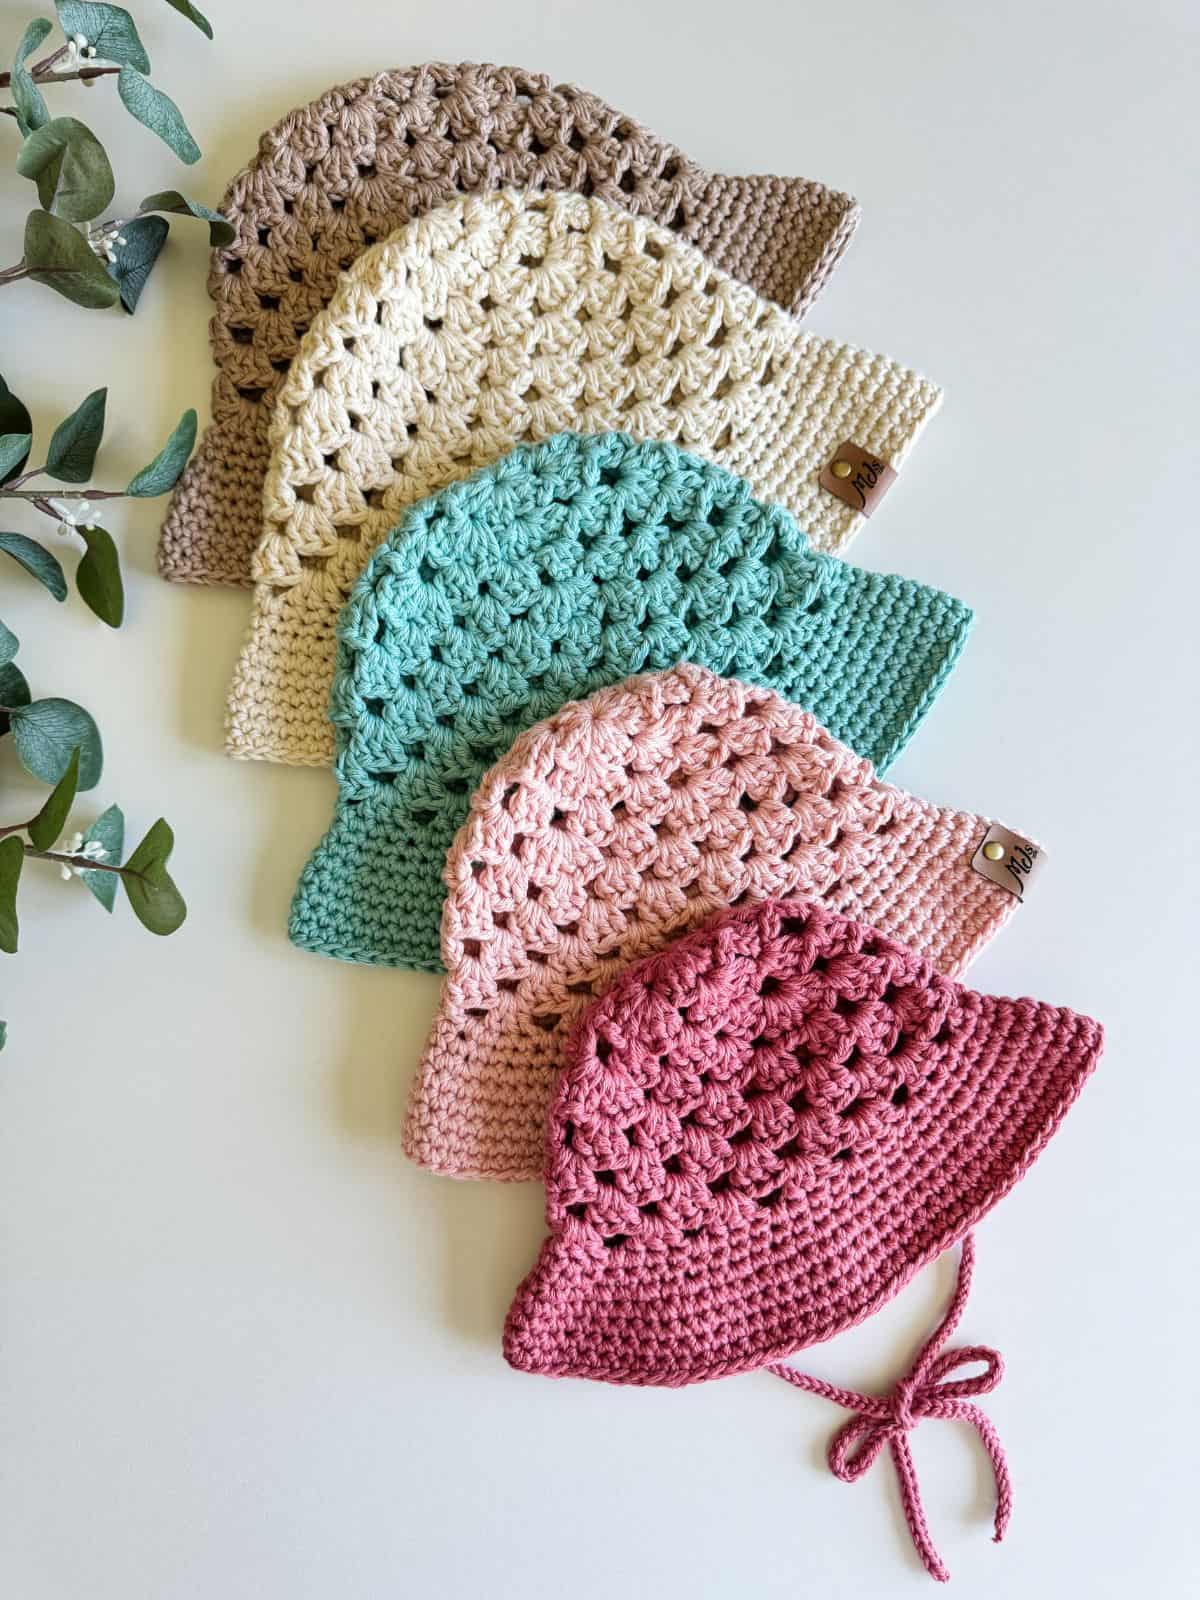 Five crocheted hats in varying colors (brown, cream, teal, light pink, and dark pink) are arranged neatly in a row. A leafy green plant is visible on the left side of the image.